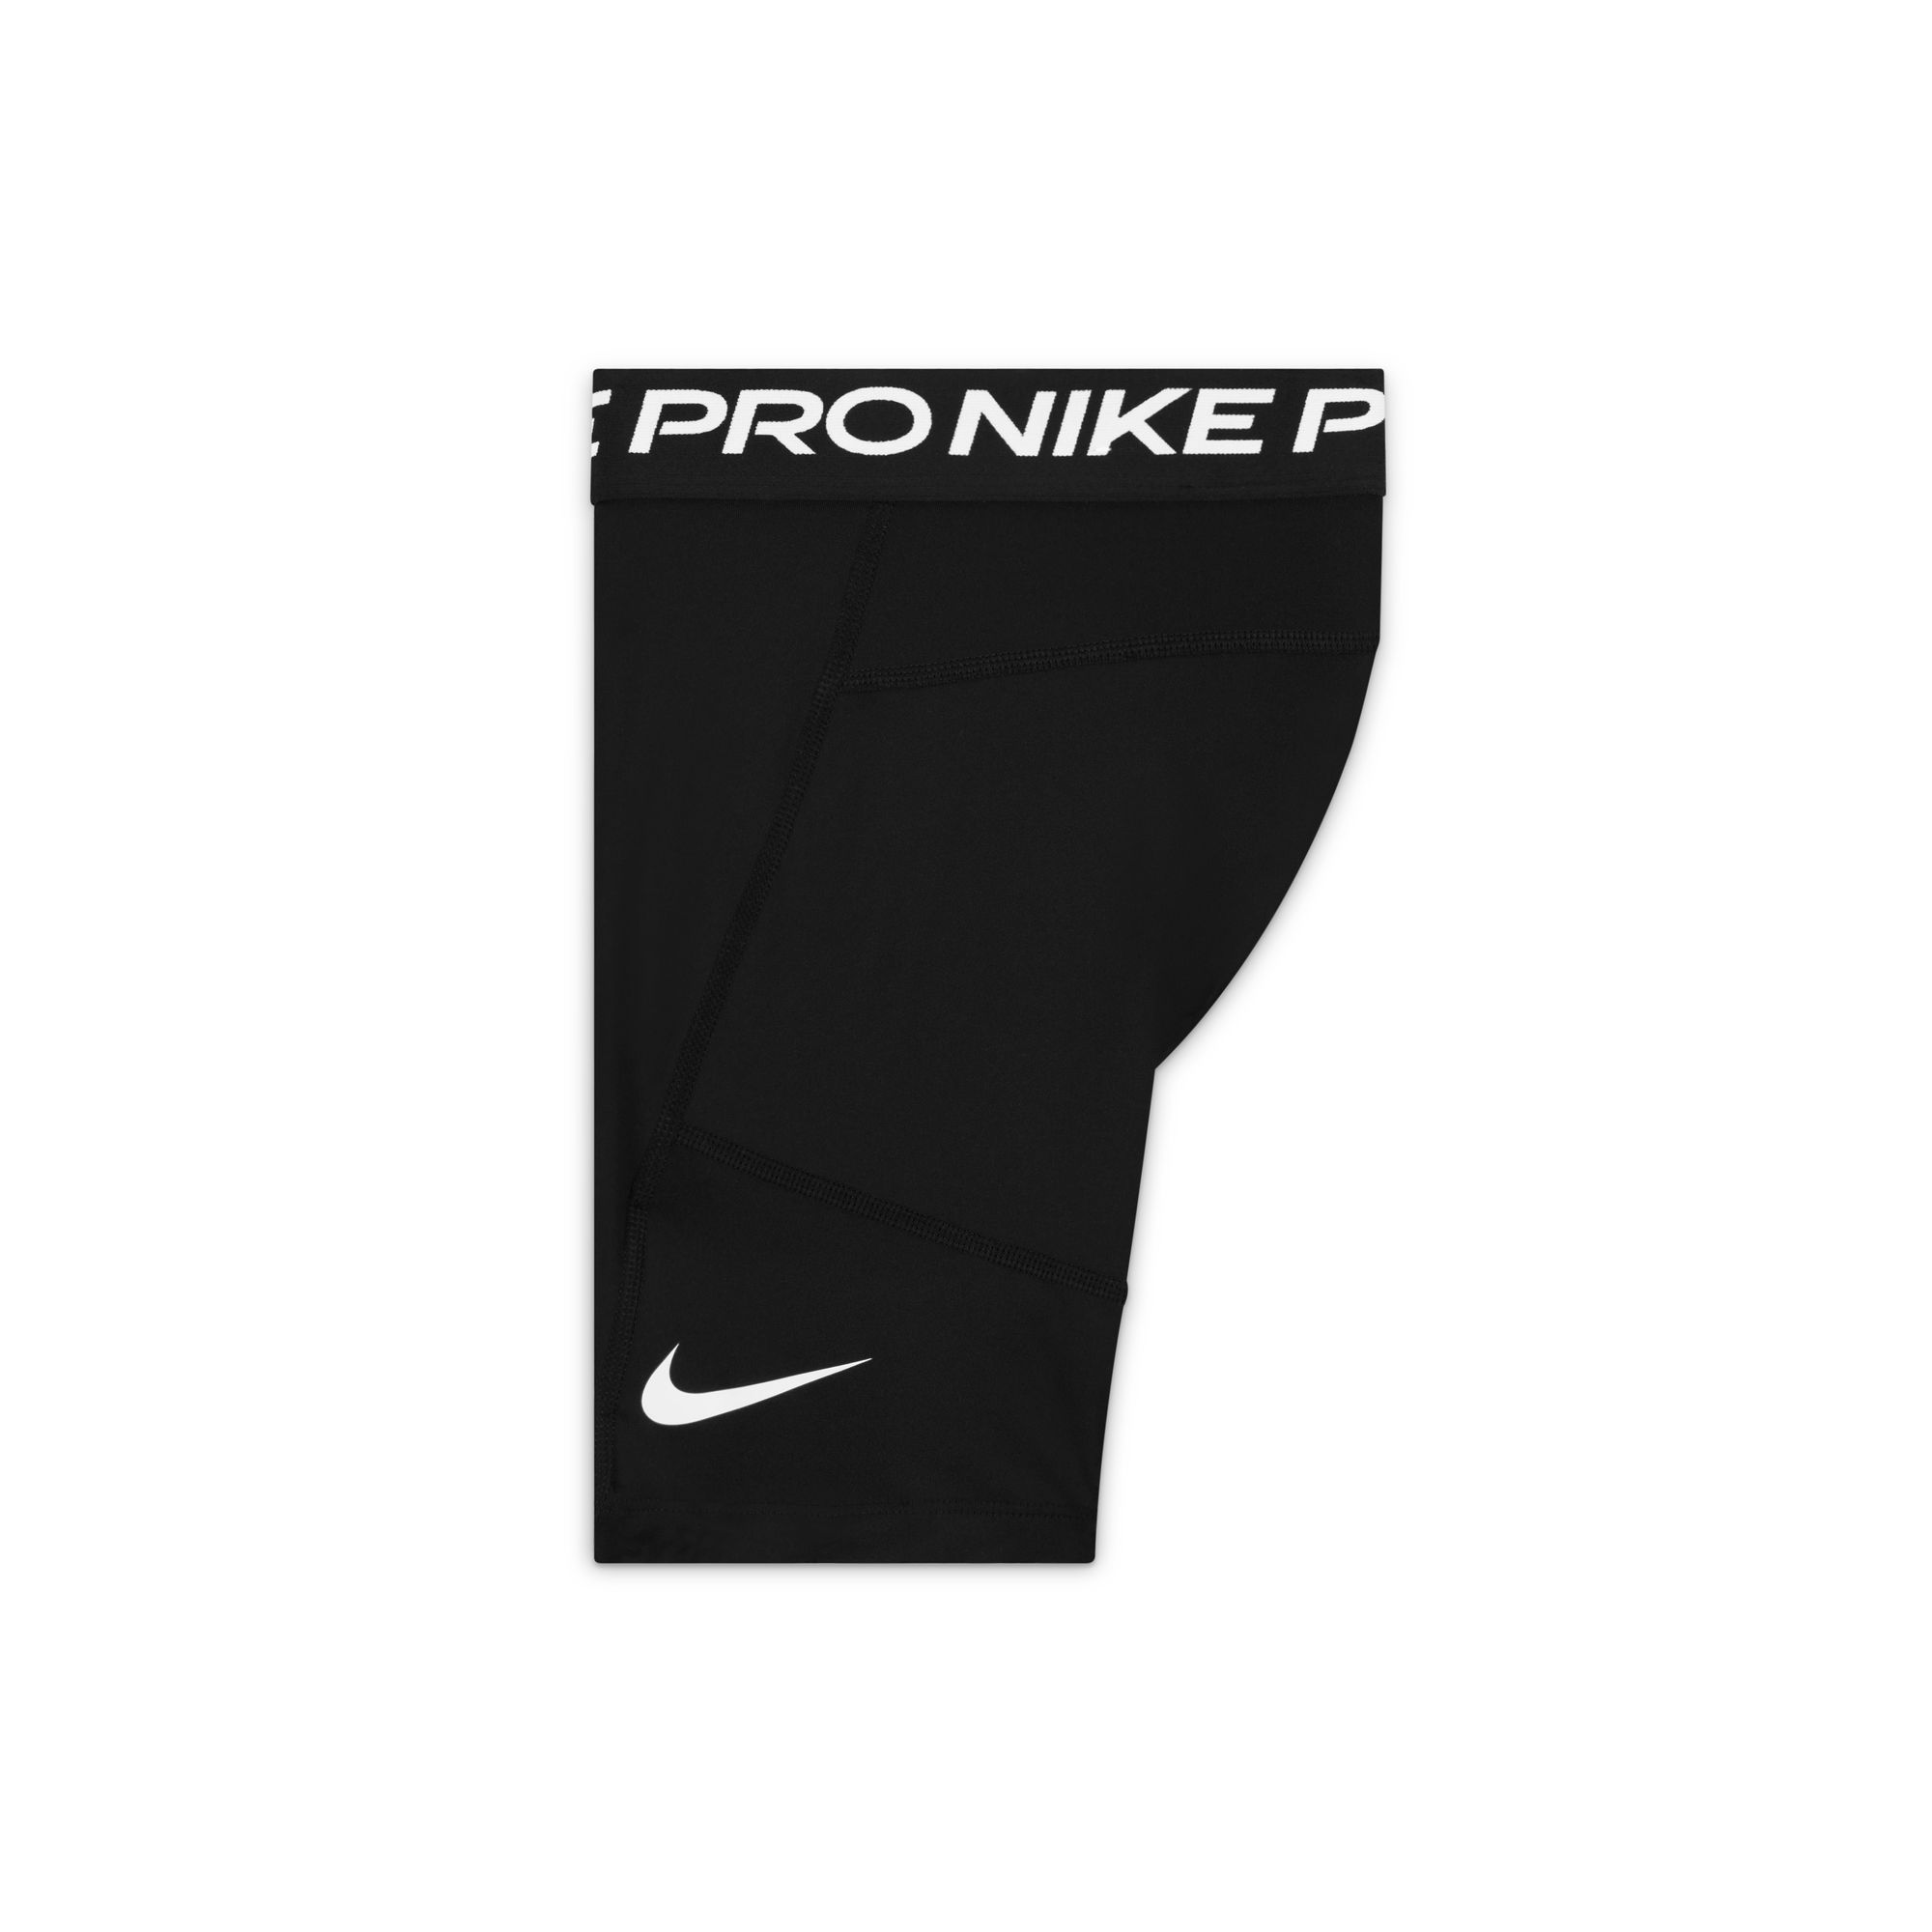 NEW Nike Pro Combat Black Compression Shorts Youth Small